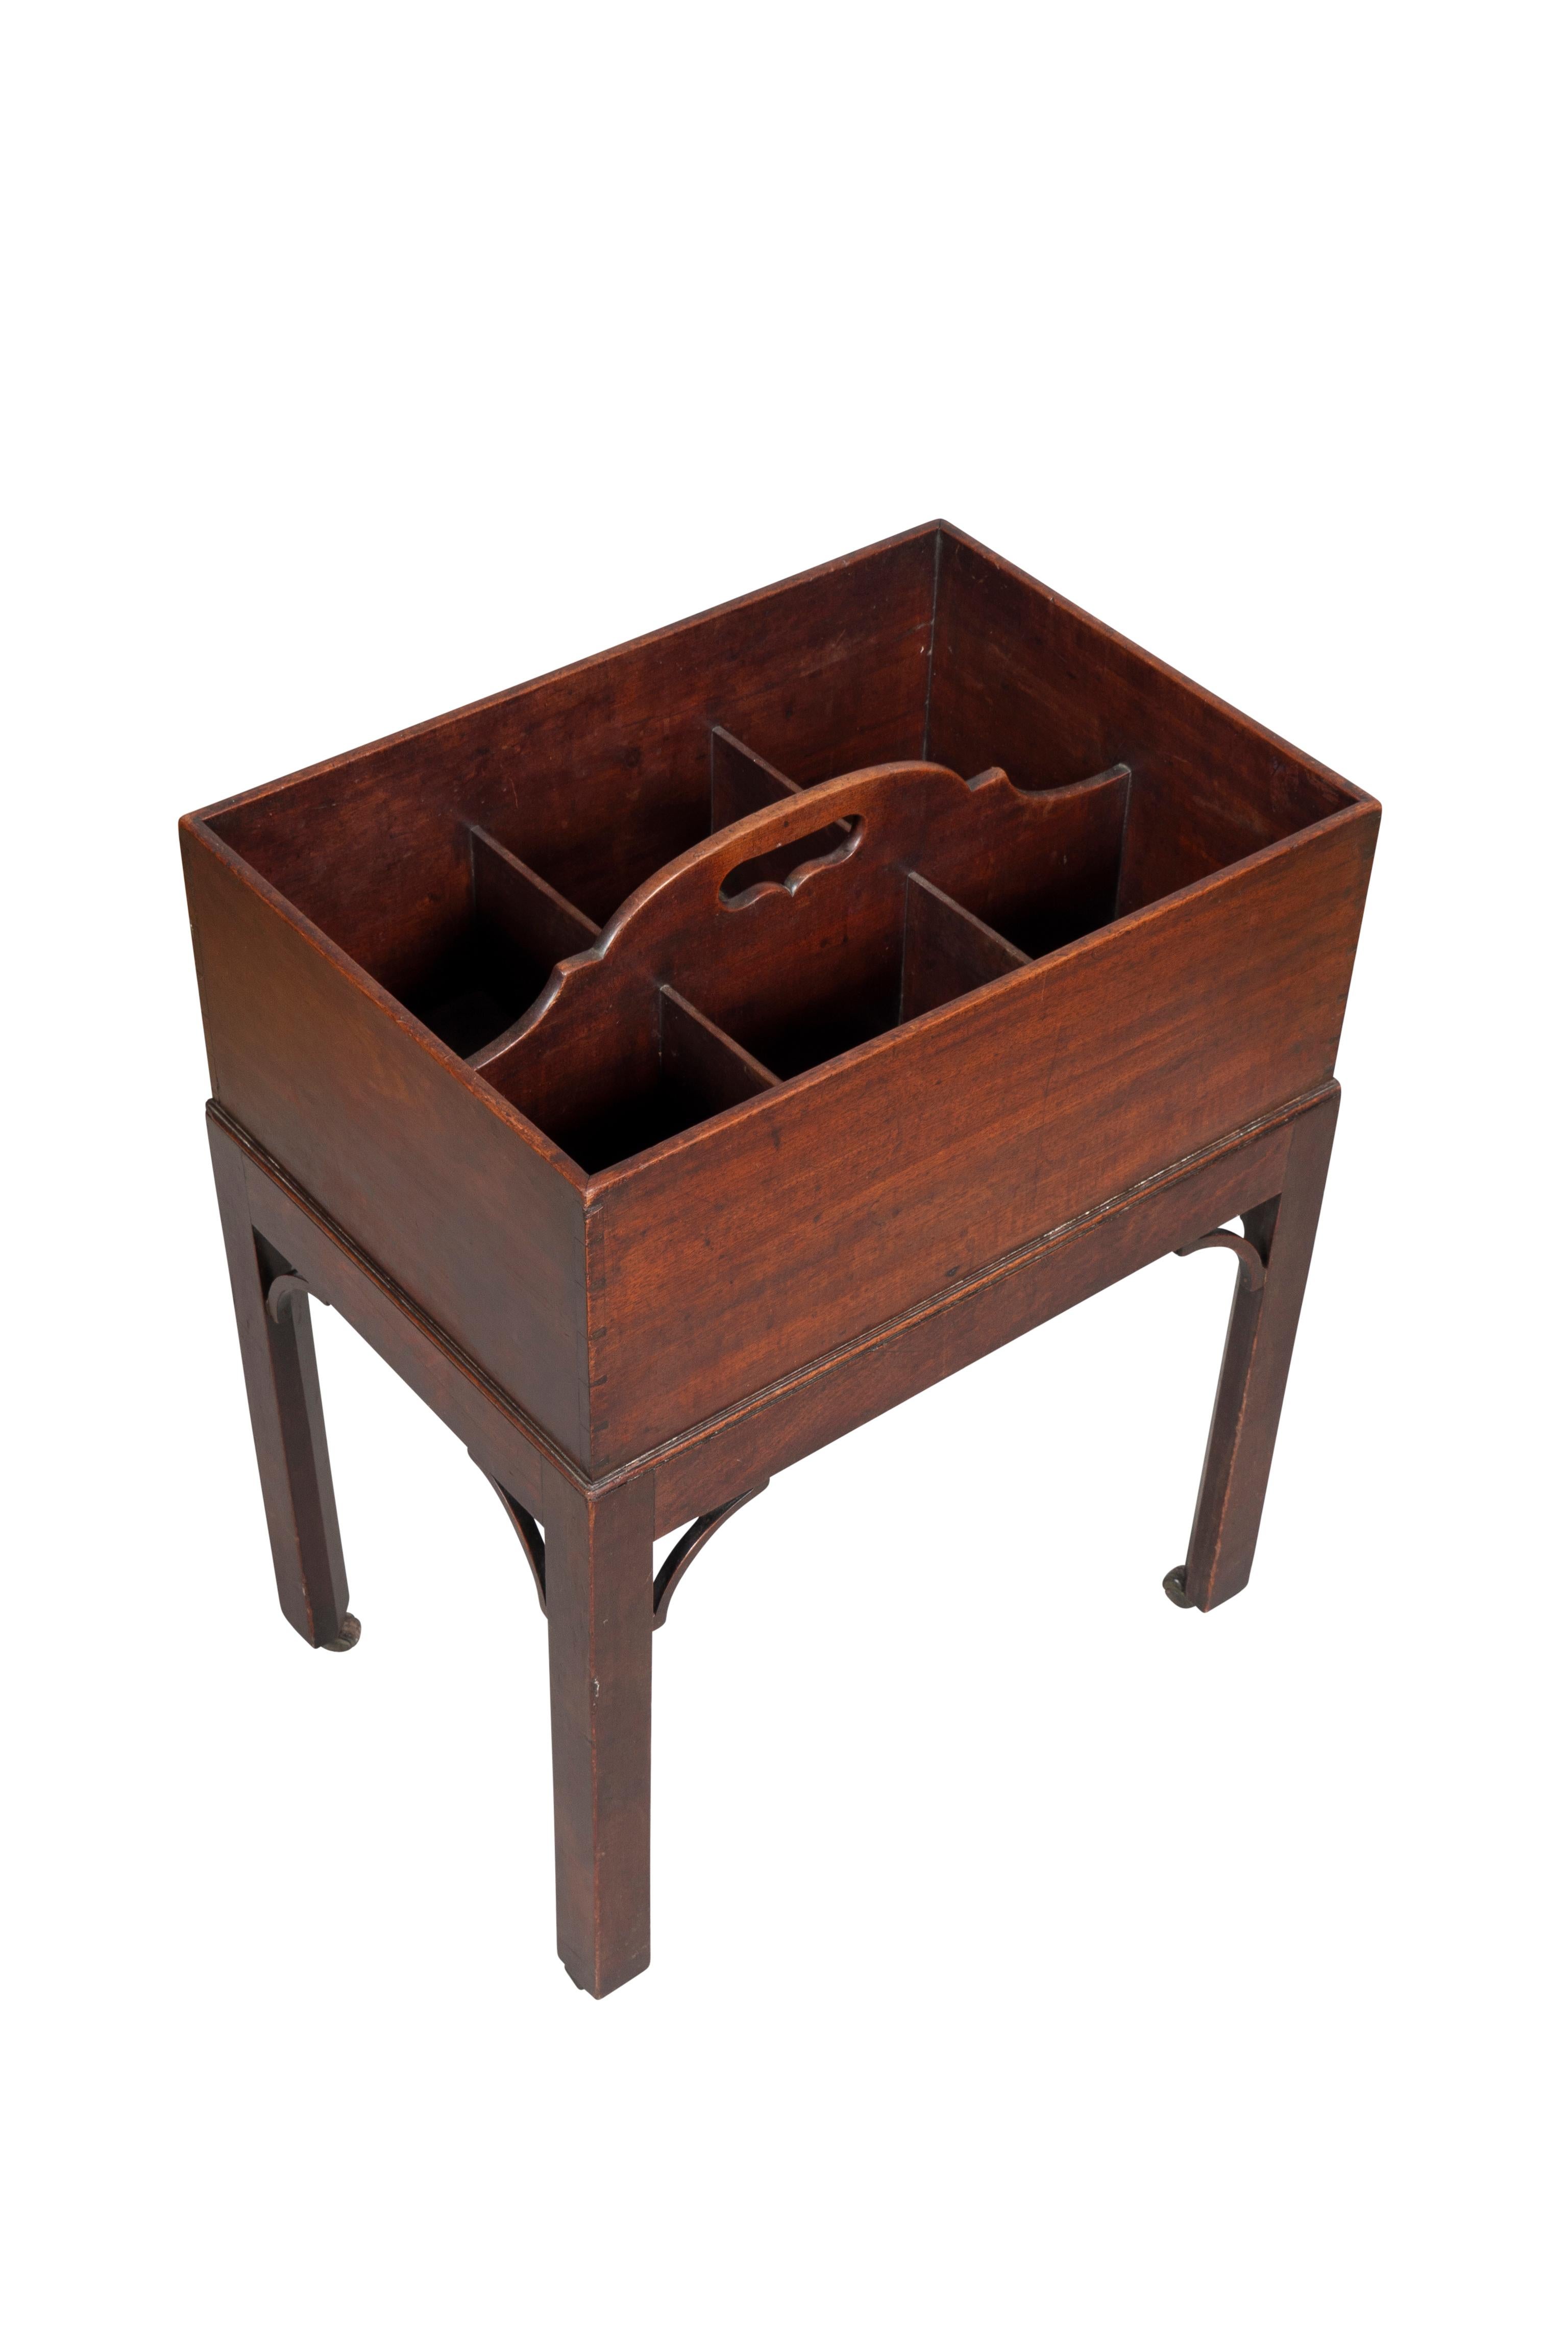 Late 18th Century George III Mahogany Decanter Box For Sale